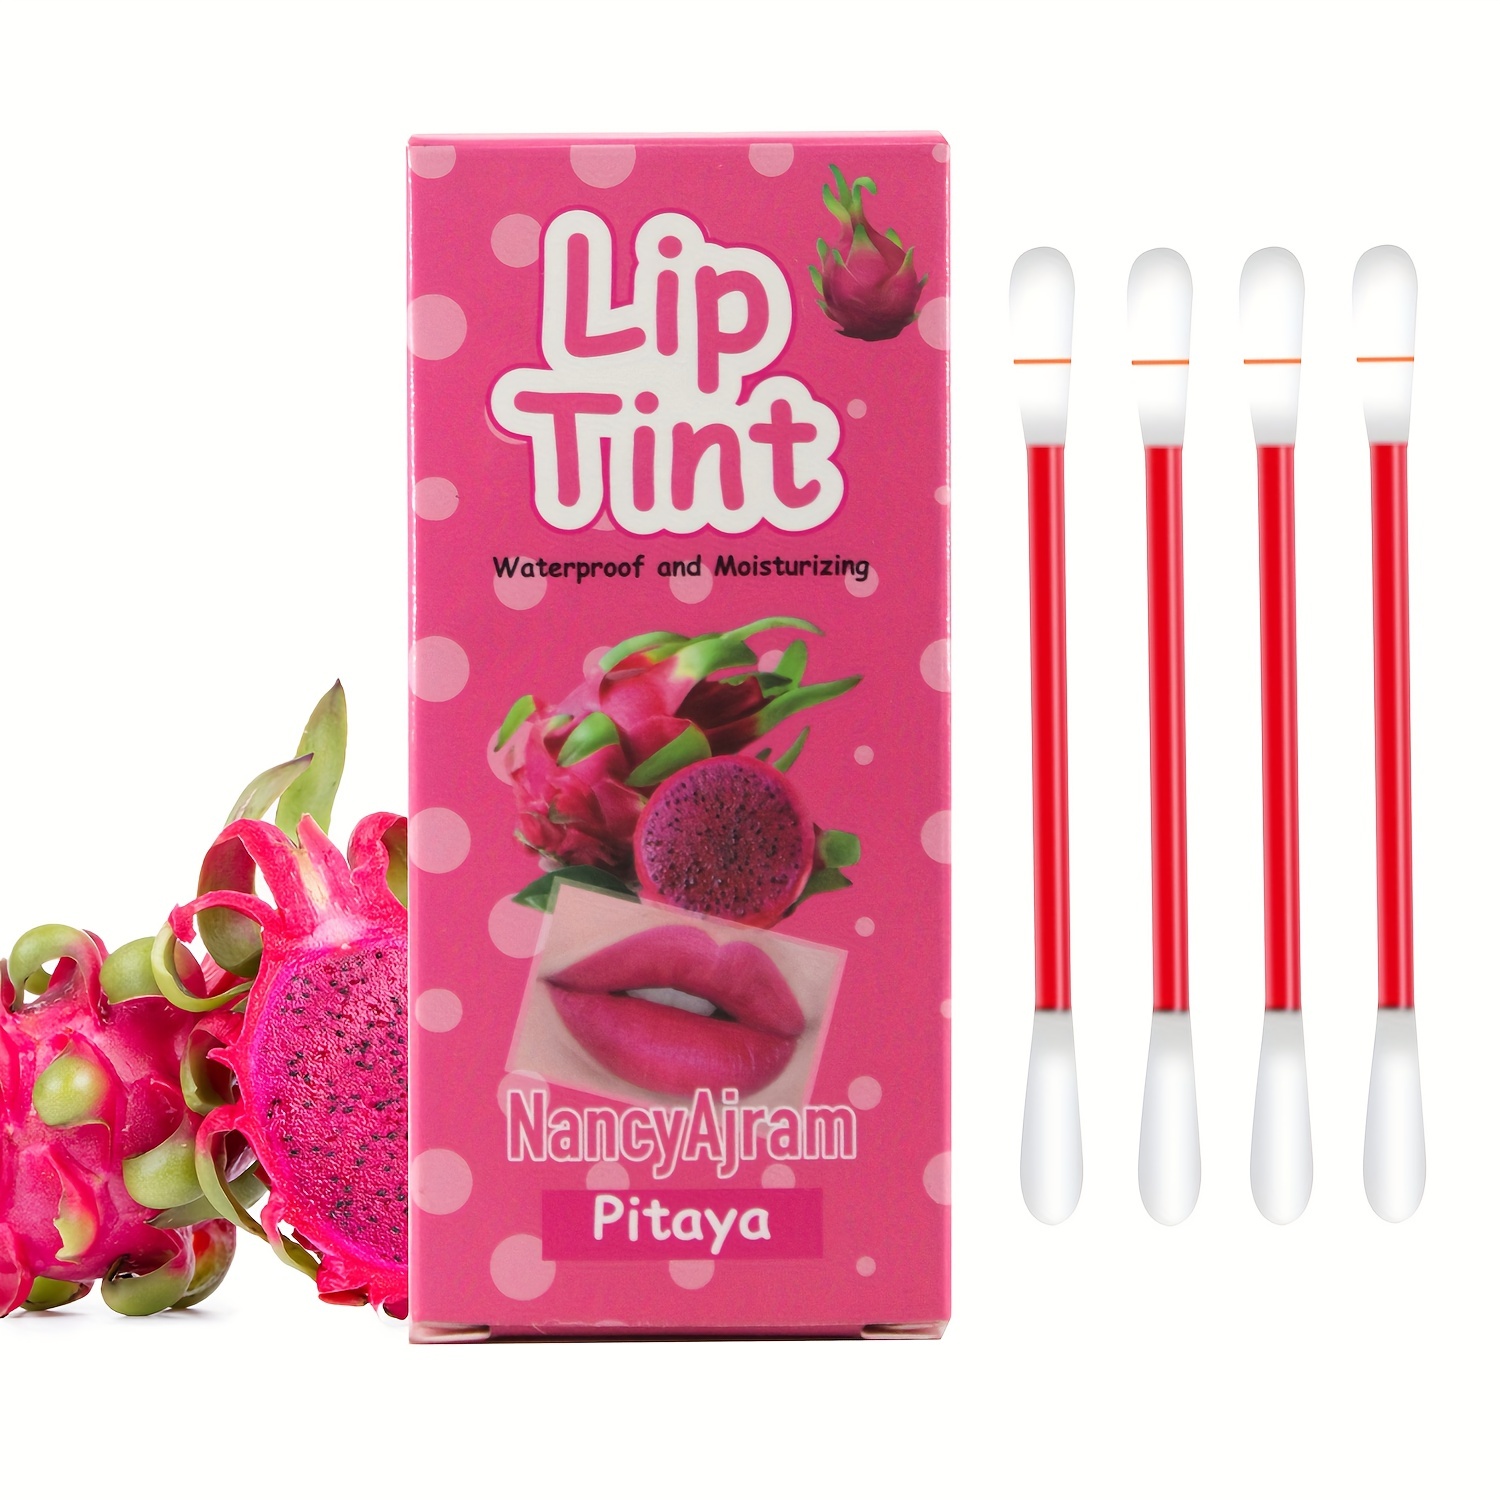 

Portable Makeup Tool Mouth Red Cotton Swab Water Strawberry Grape Pitaya Pomegranate Flavor Lip Gloss Color Makeup Lip Glaze Valentine's Day Gifts